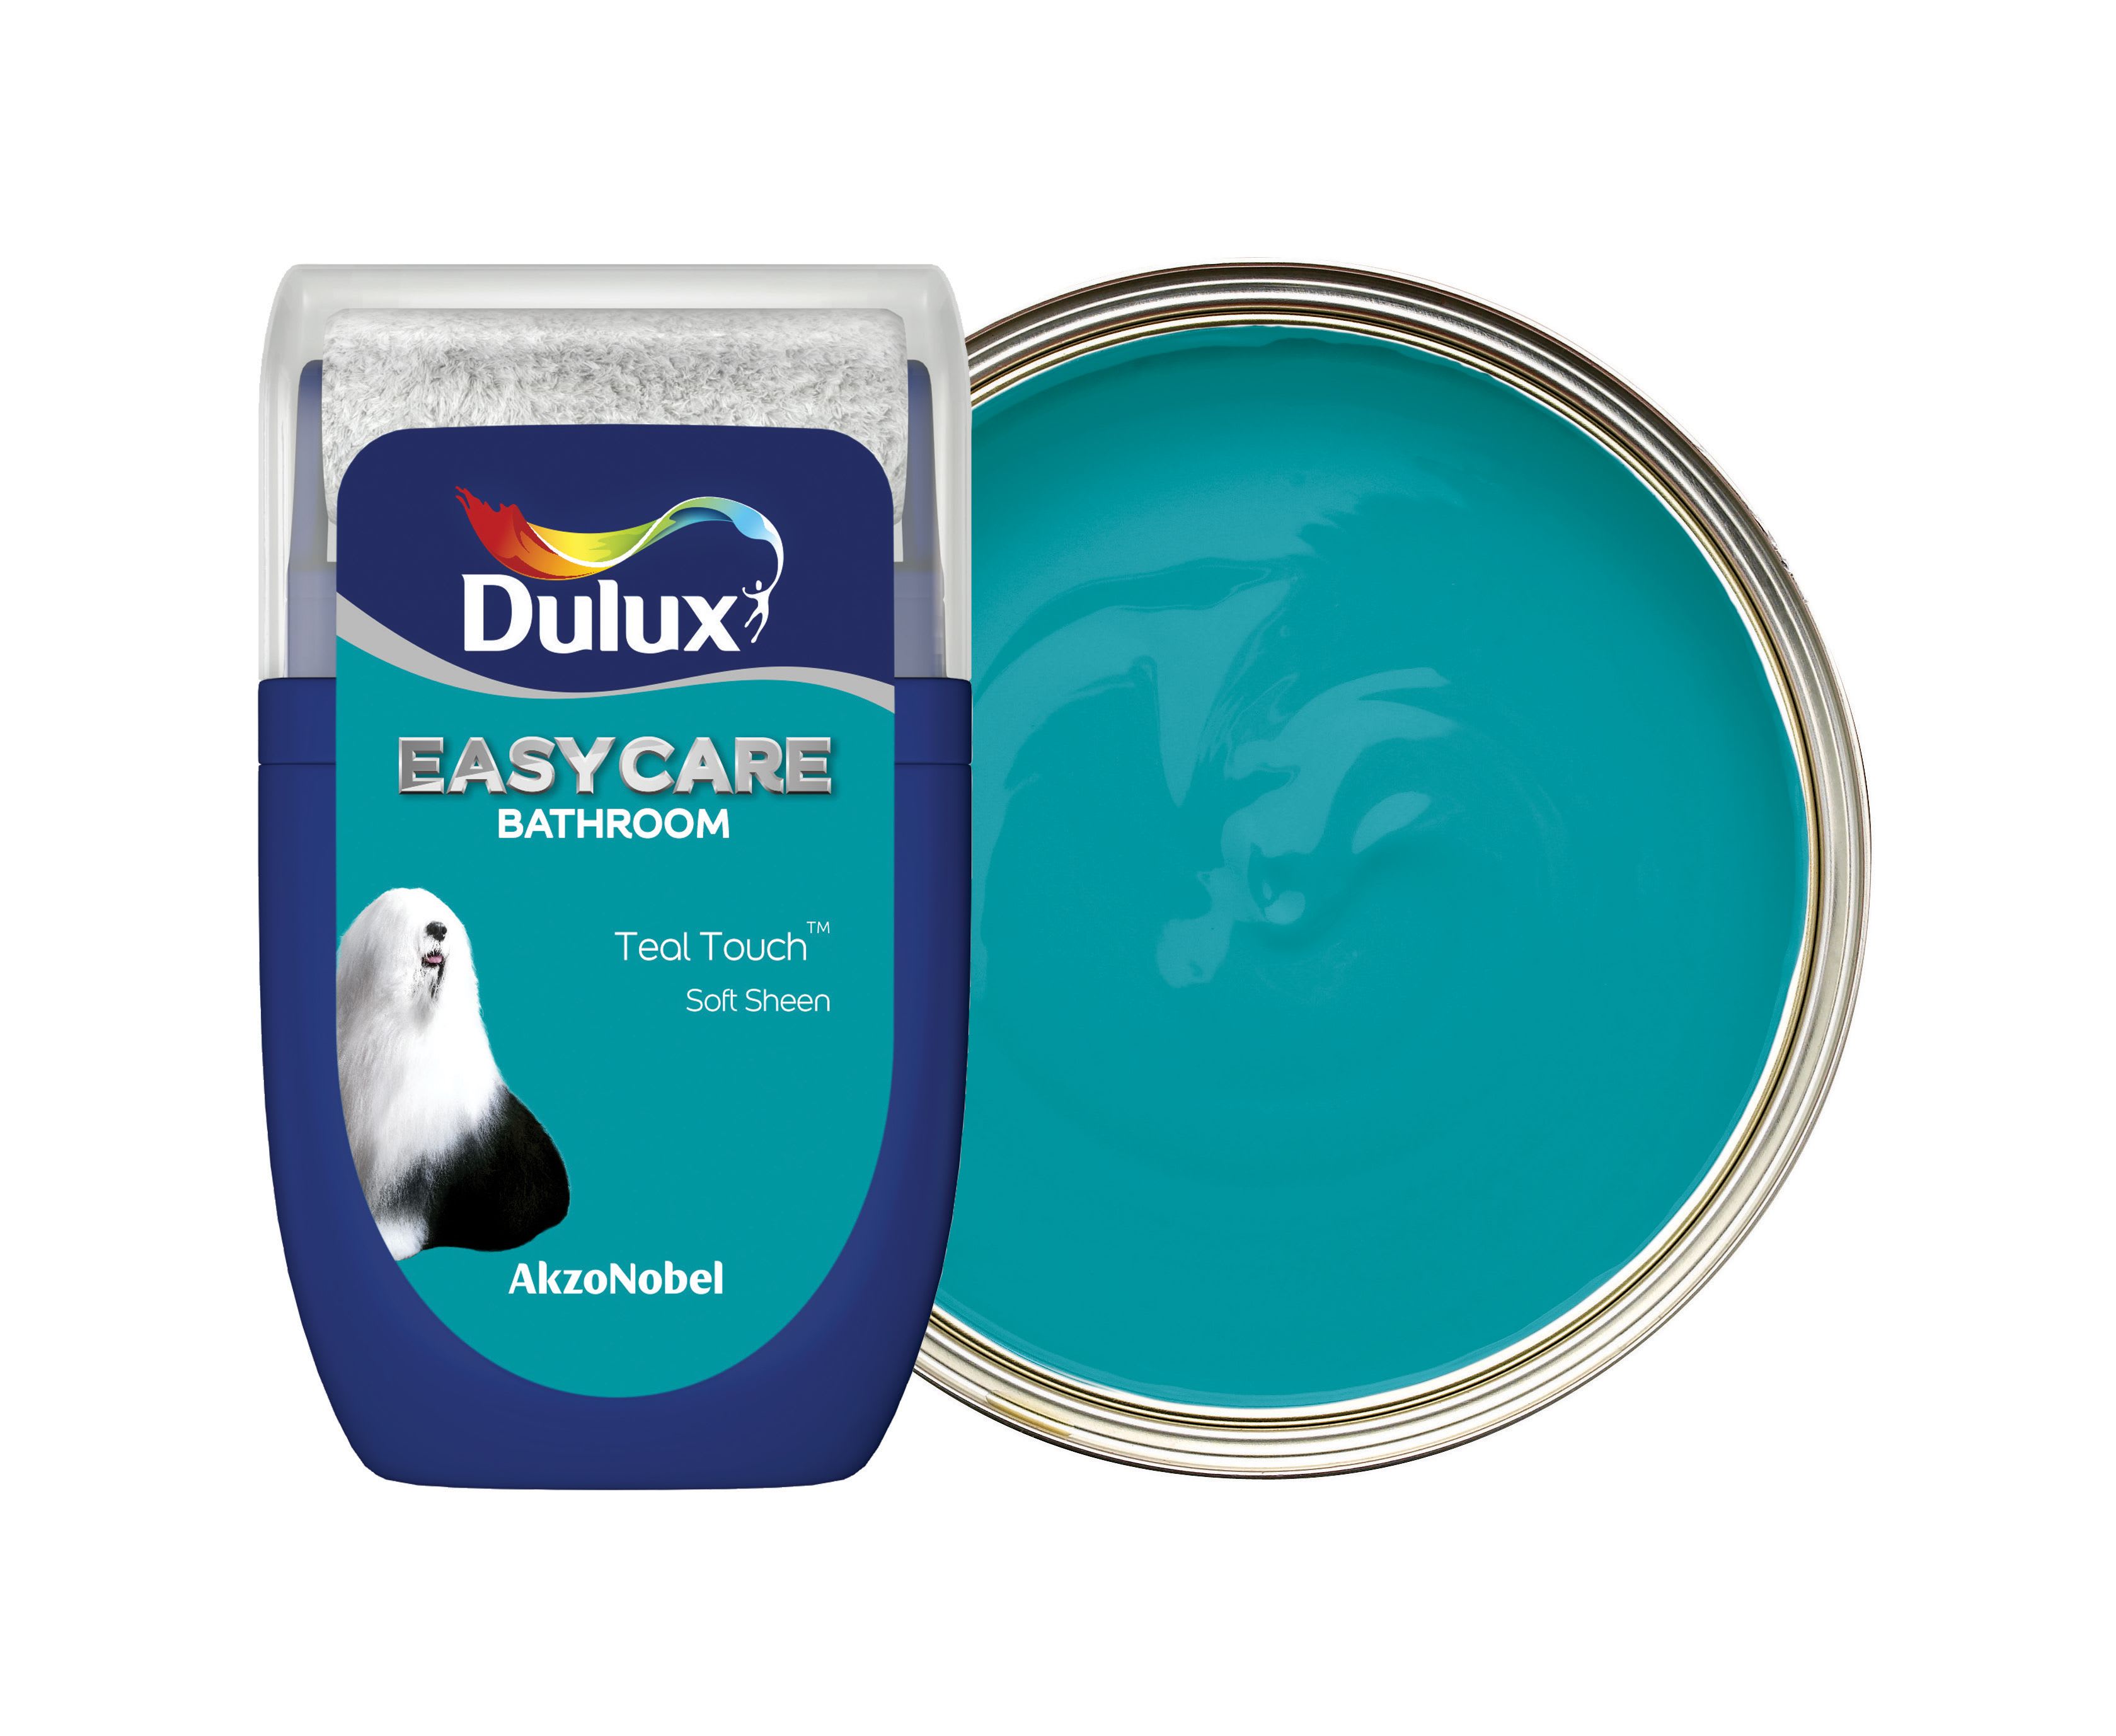 Dulux Easycare Bathroom Paint - Teal Touch Tester